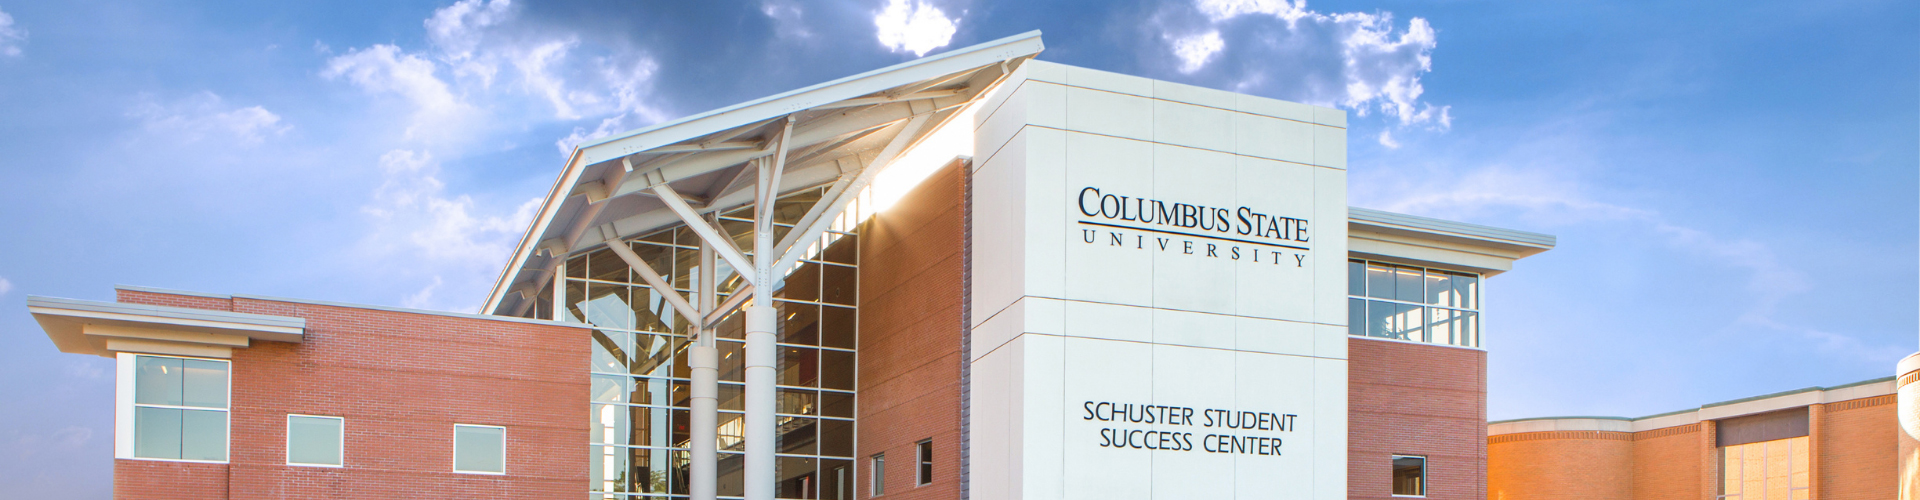 the front of the Schuster Student Success Center